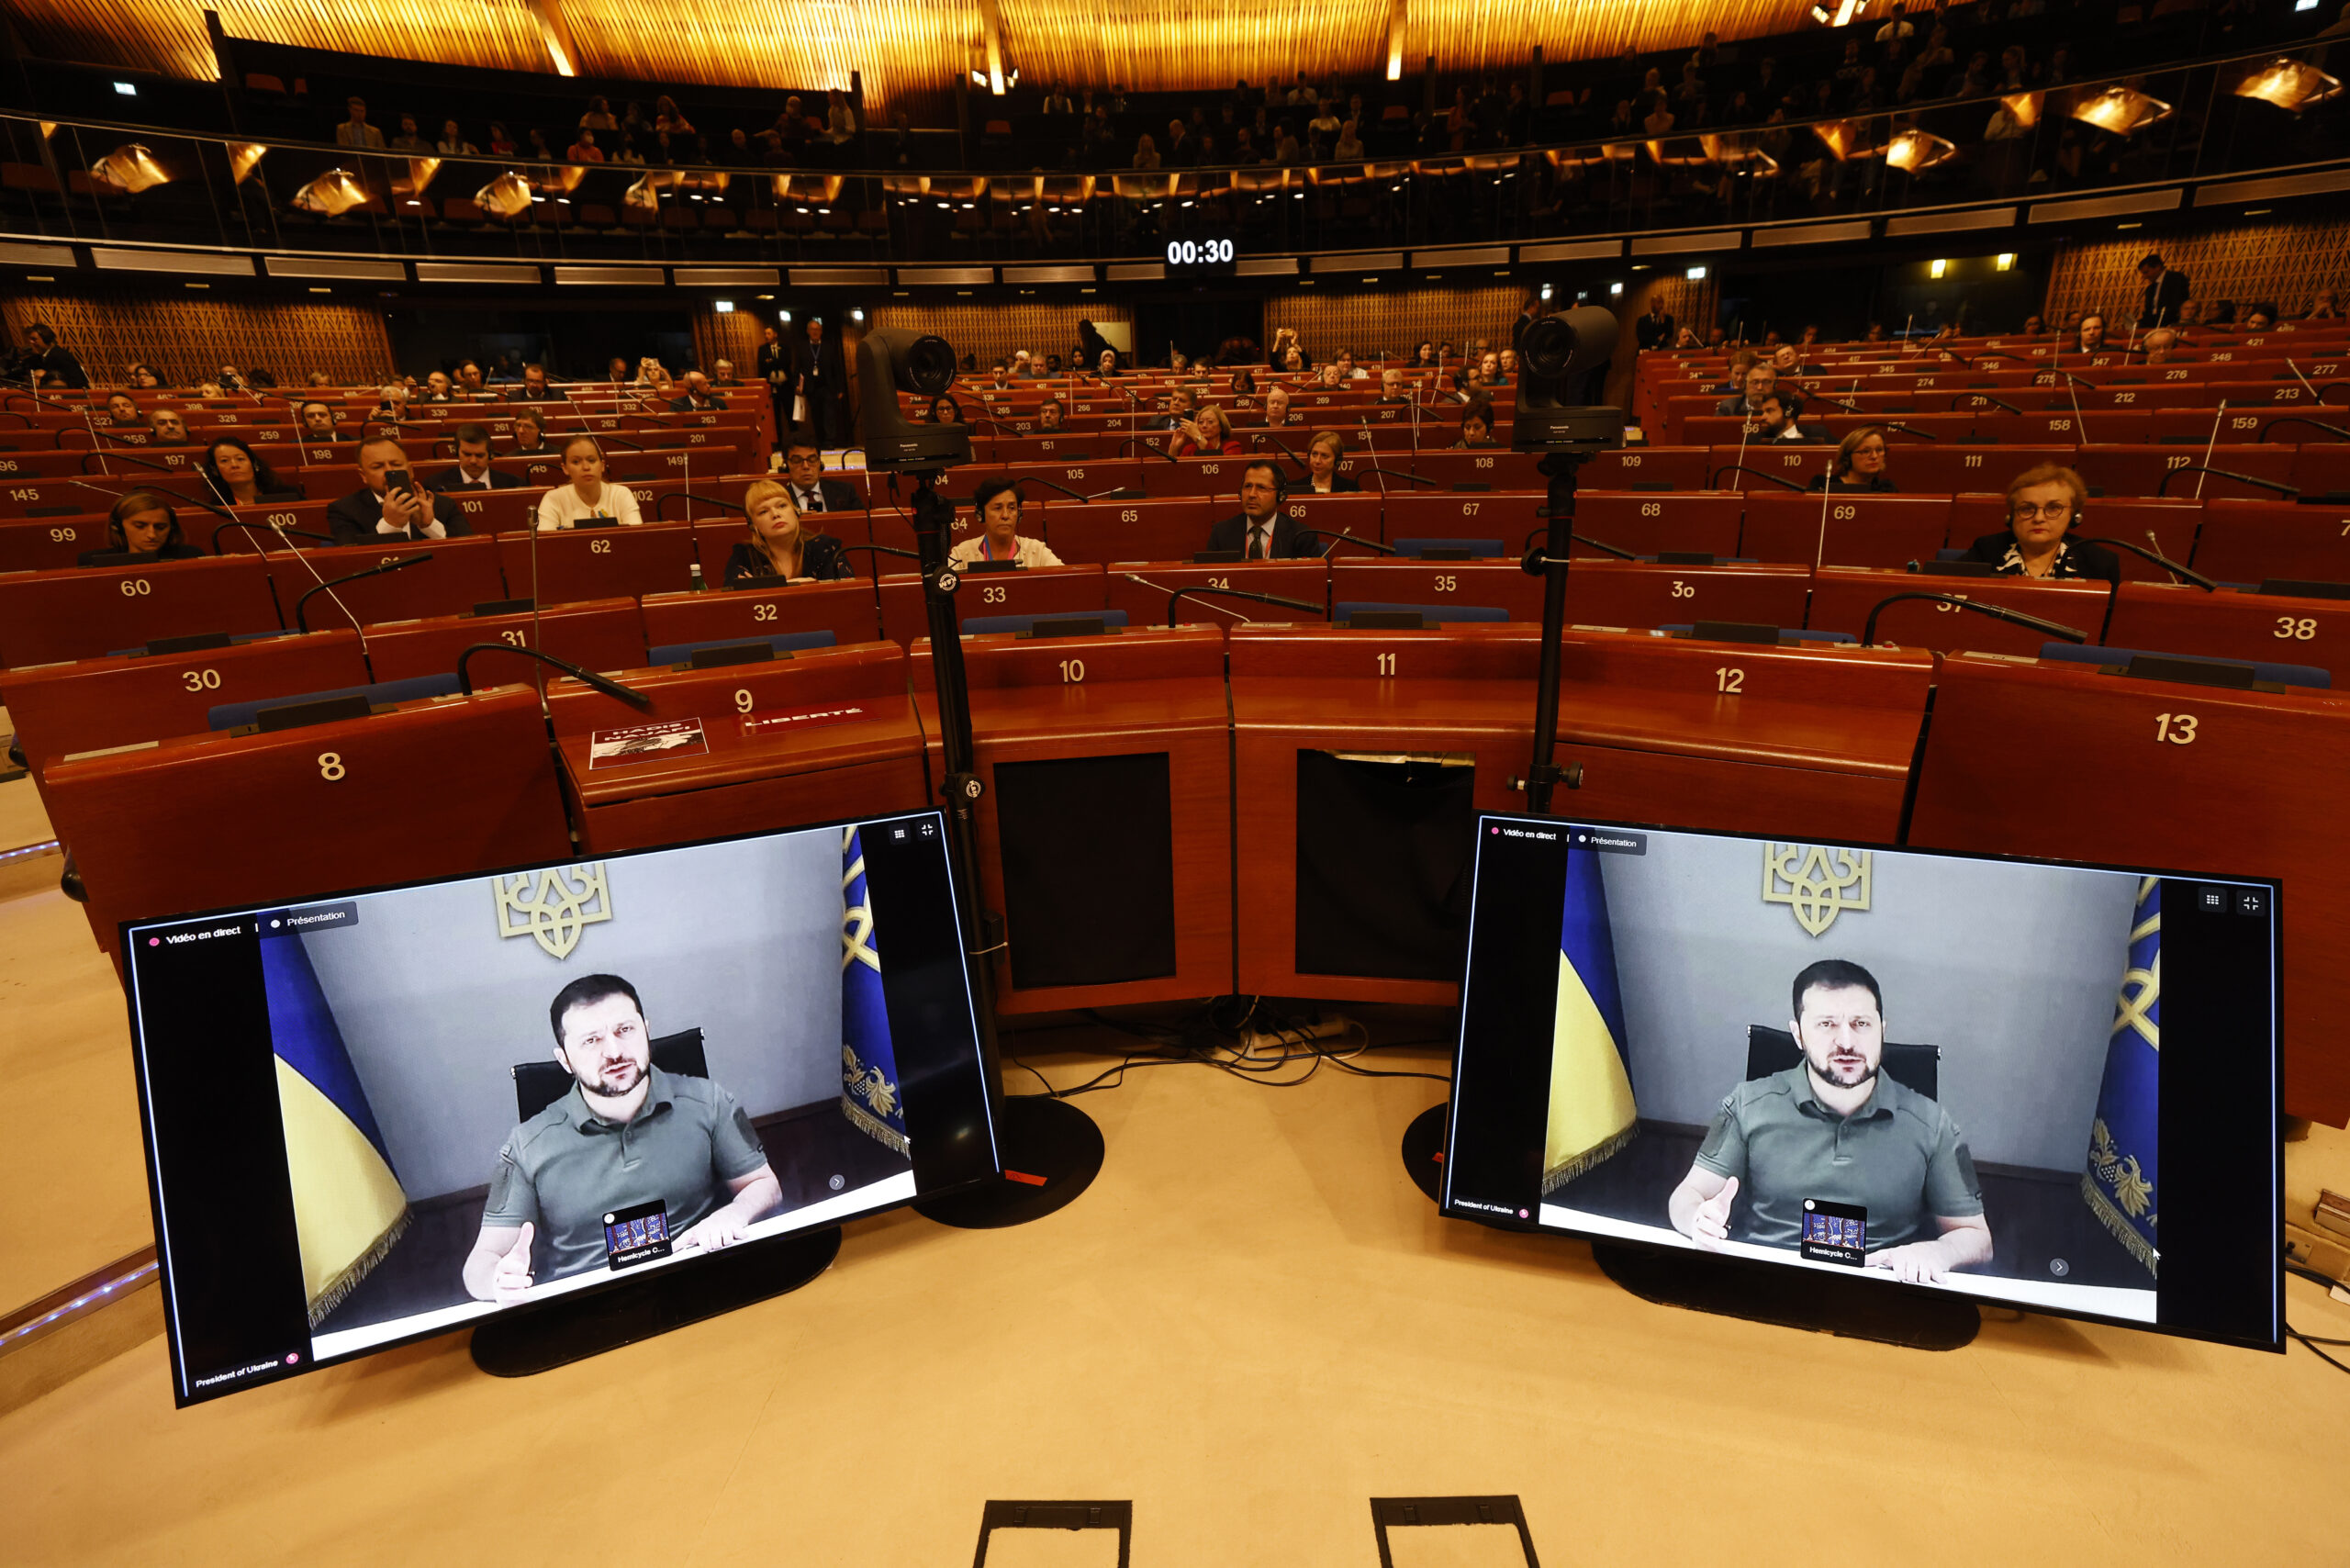 Ukrainian President Volodymyr Zelenskyy speaks during a video address to the European Council, Thursday, Oct. 13, 2022 in Strasbourg, eastern France. Ukraine's capital region was struck by Iranian-made kamikaze drones early Thursday, officials said, sending rescue workers rushing to the scene as residents awoke to air raid sirens for the fourth consecutive morning following Russia's major assault across the country earlier this week. (AP Photo/Jean-Francois Badias)